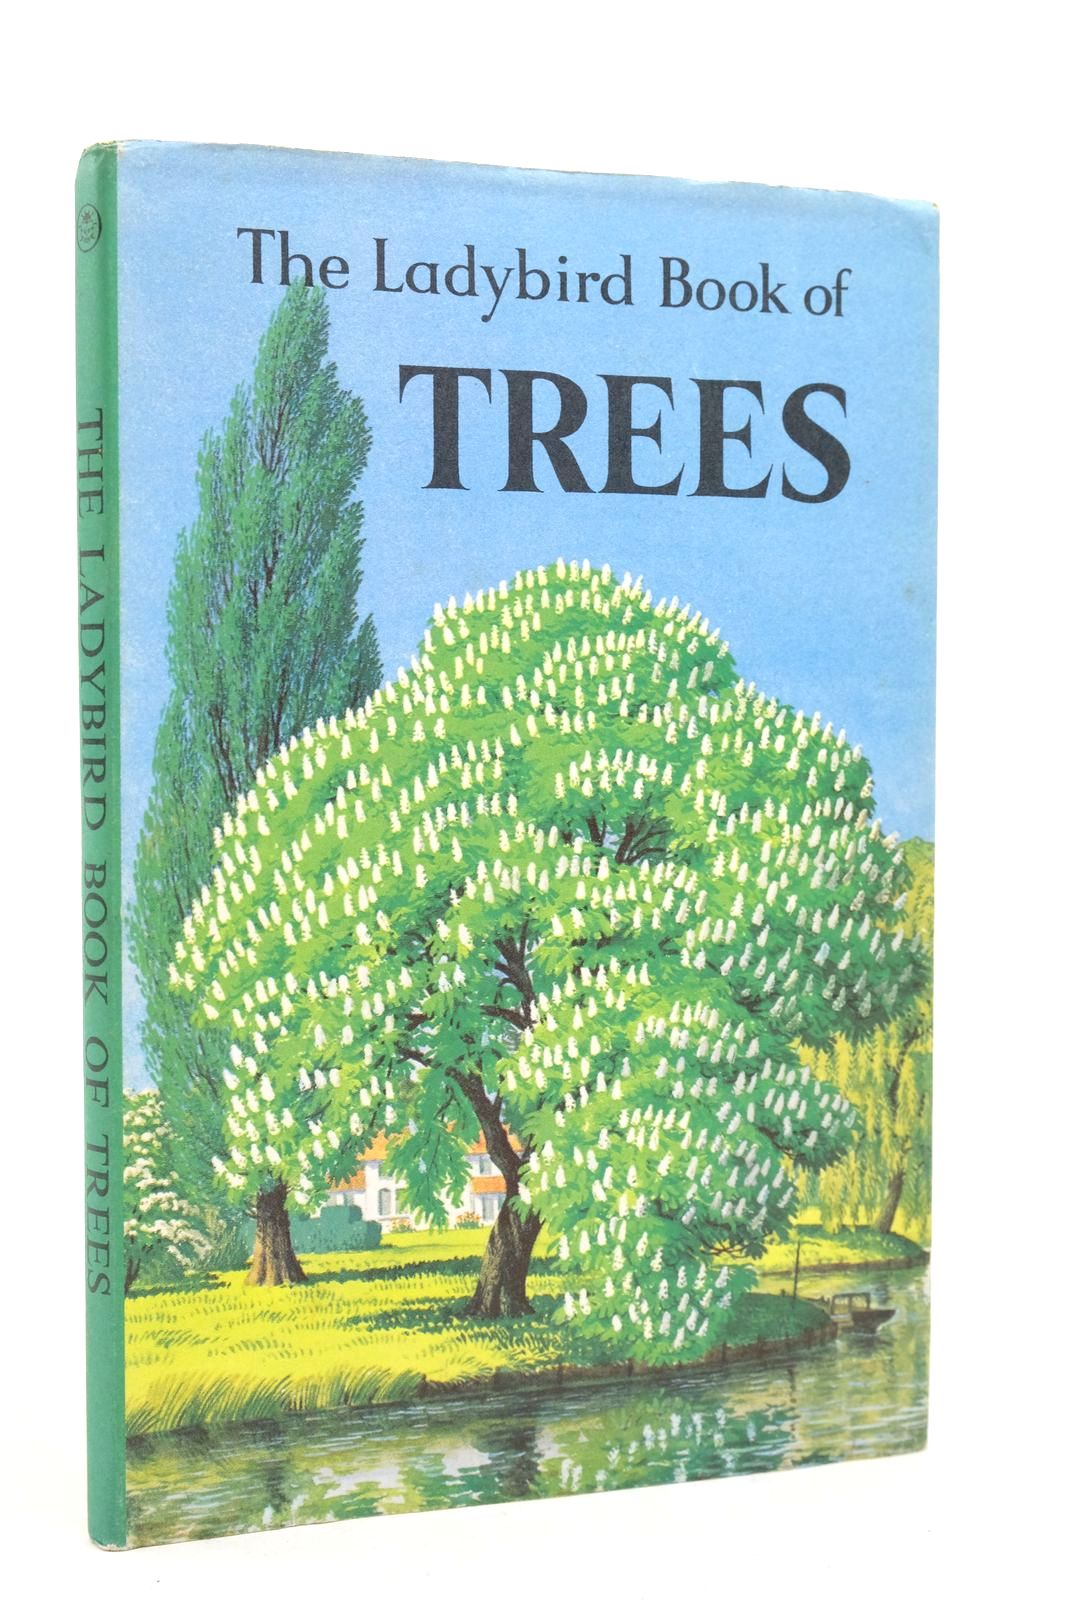 Photo of THE LADYBIRD BOOK OF TREES written by Vesey-Fitzgerald, Brian illustrated by Badmin, S.R. published by Wills & Hepworth Ltd. (STOCK CODE: 2139708)  for sale by Stella & Rose's Books